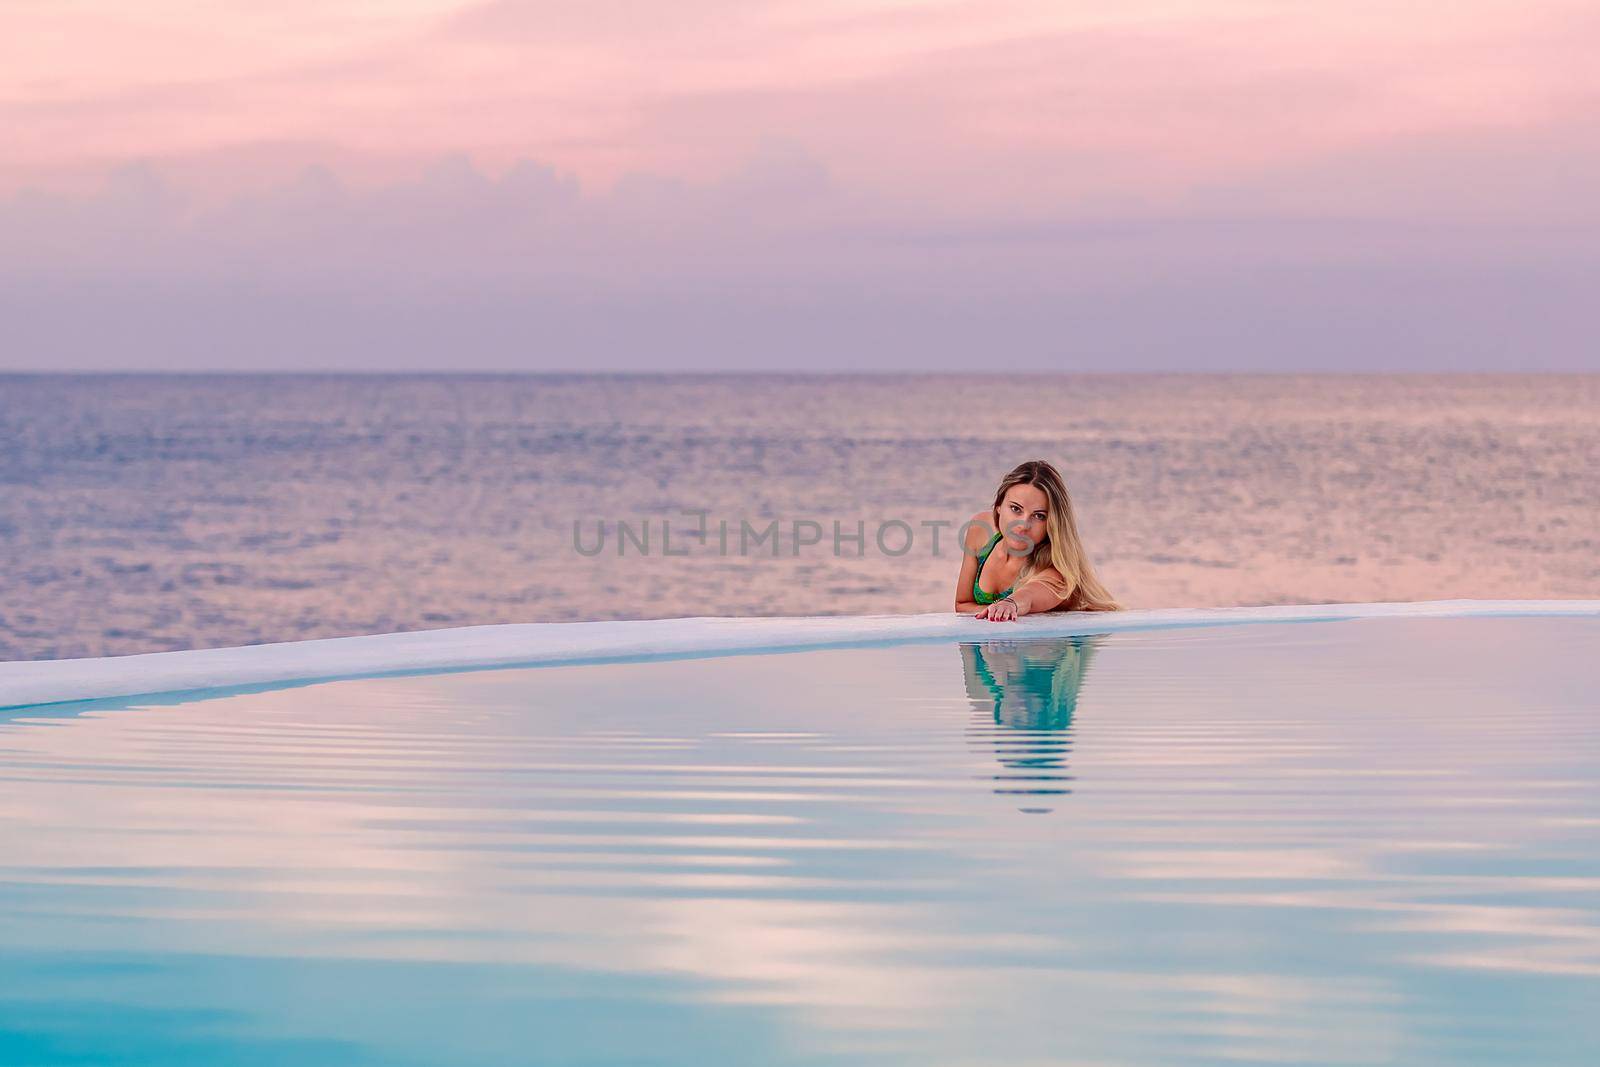 A young girl in a green swimsuit, at dawn by the sea pool, calmly and relaxed looking at her reflection in the water. Pink clouds in the background.